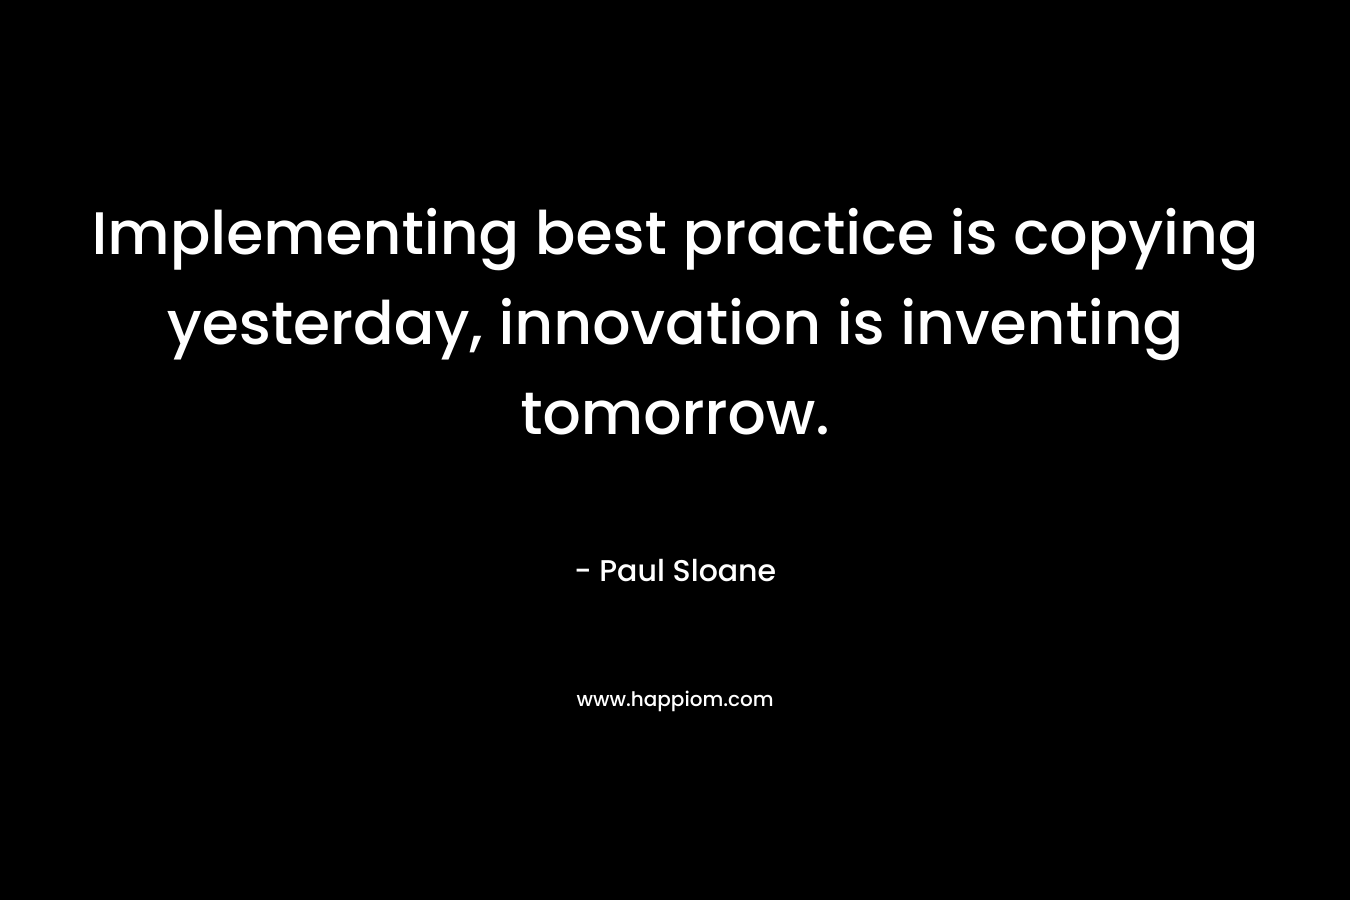 Implementing best practice is copying yesterday, innovation is inventing tomorrow. – Paul Sloane